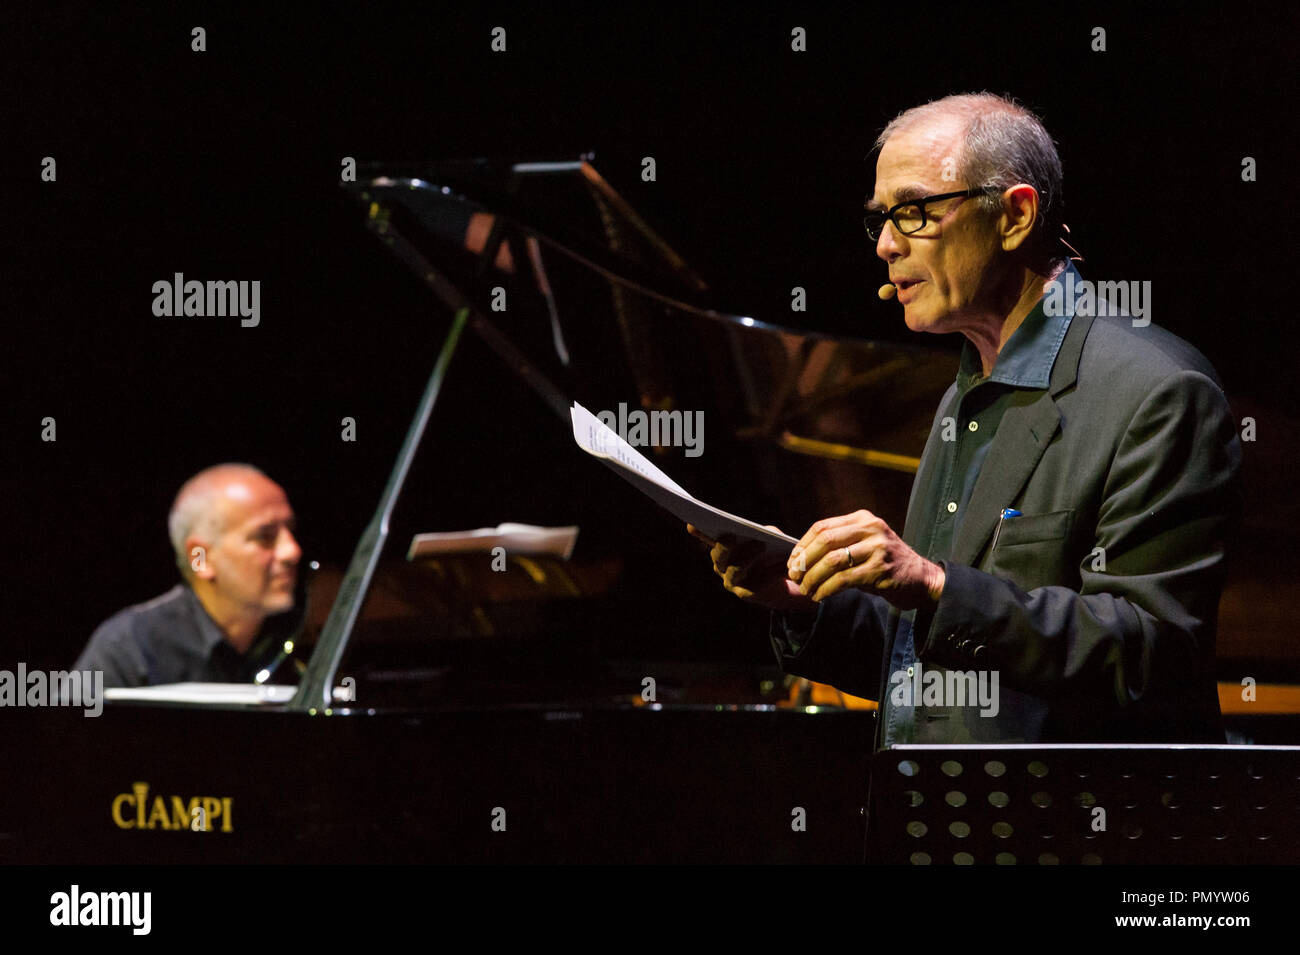 Danilo Rea at the piano and Urbano Barberini, narrator, presented on 18/9/2018 at the Auditorium Parco della Musica in Rome at the Franco-Italian Festival of jazz and improvised music 'Una striscia di Terra Feconda', the pièce by Nello Trocchia (journalist and writer threatened by the Camorra for his own writings), 'The ruins of Hadrian'. Voice narrator Urbano Barberini, who interacted with the improvisations of the pianist Danilo Rea. The pièce tells of an important victory of civil society on business policy, which had planned to build a landfill at the Hadrian's Villa, Unesco site. Urbano B Stock Photo